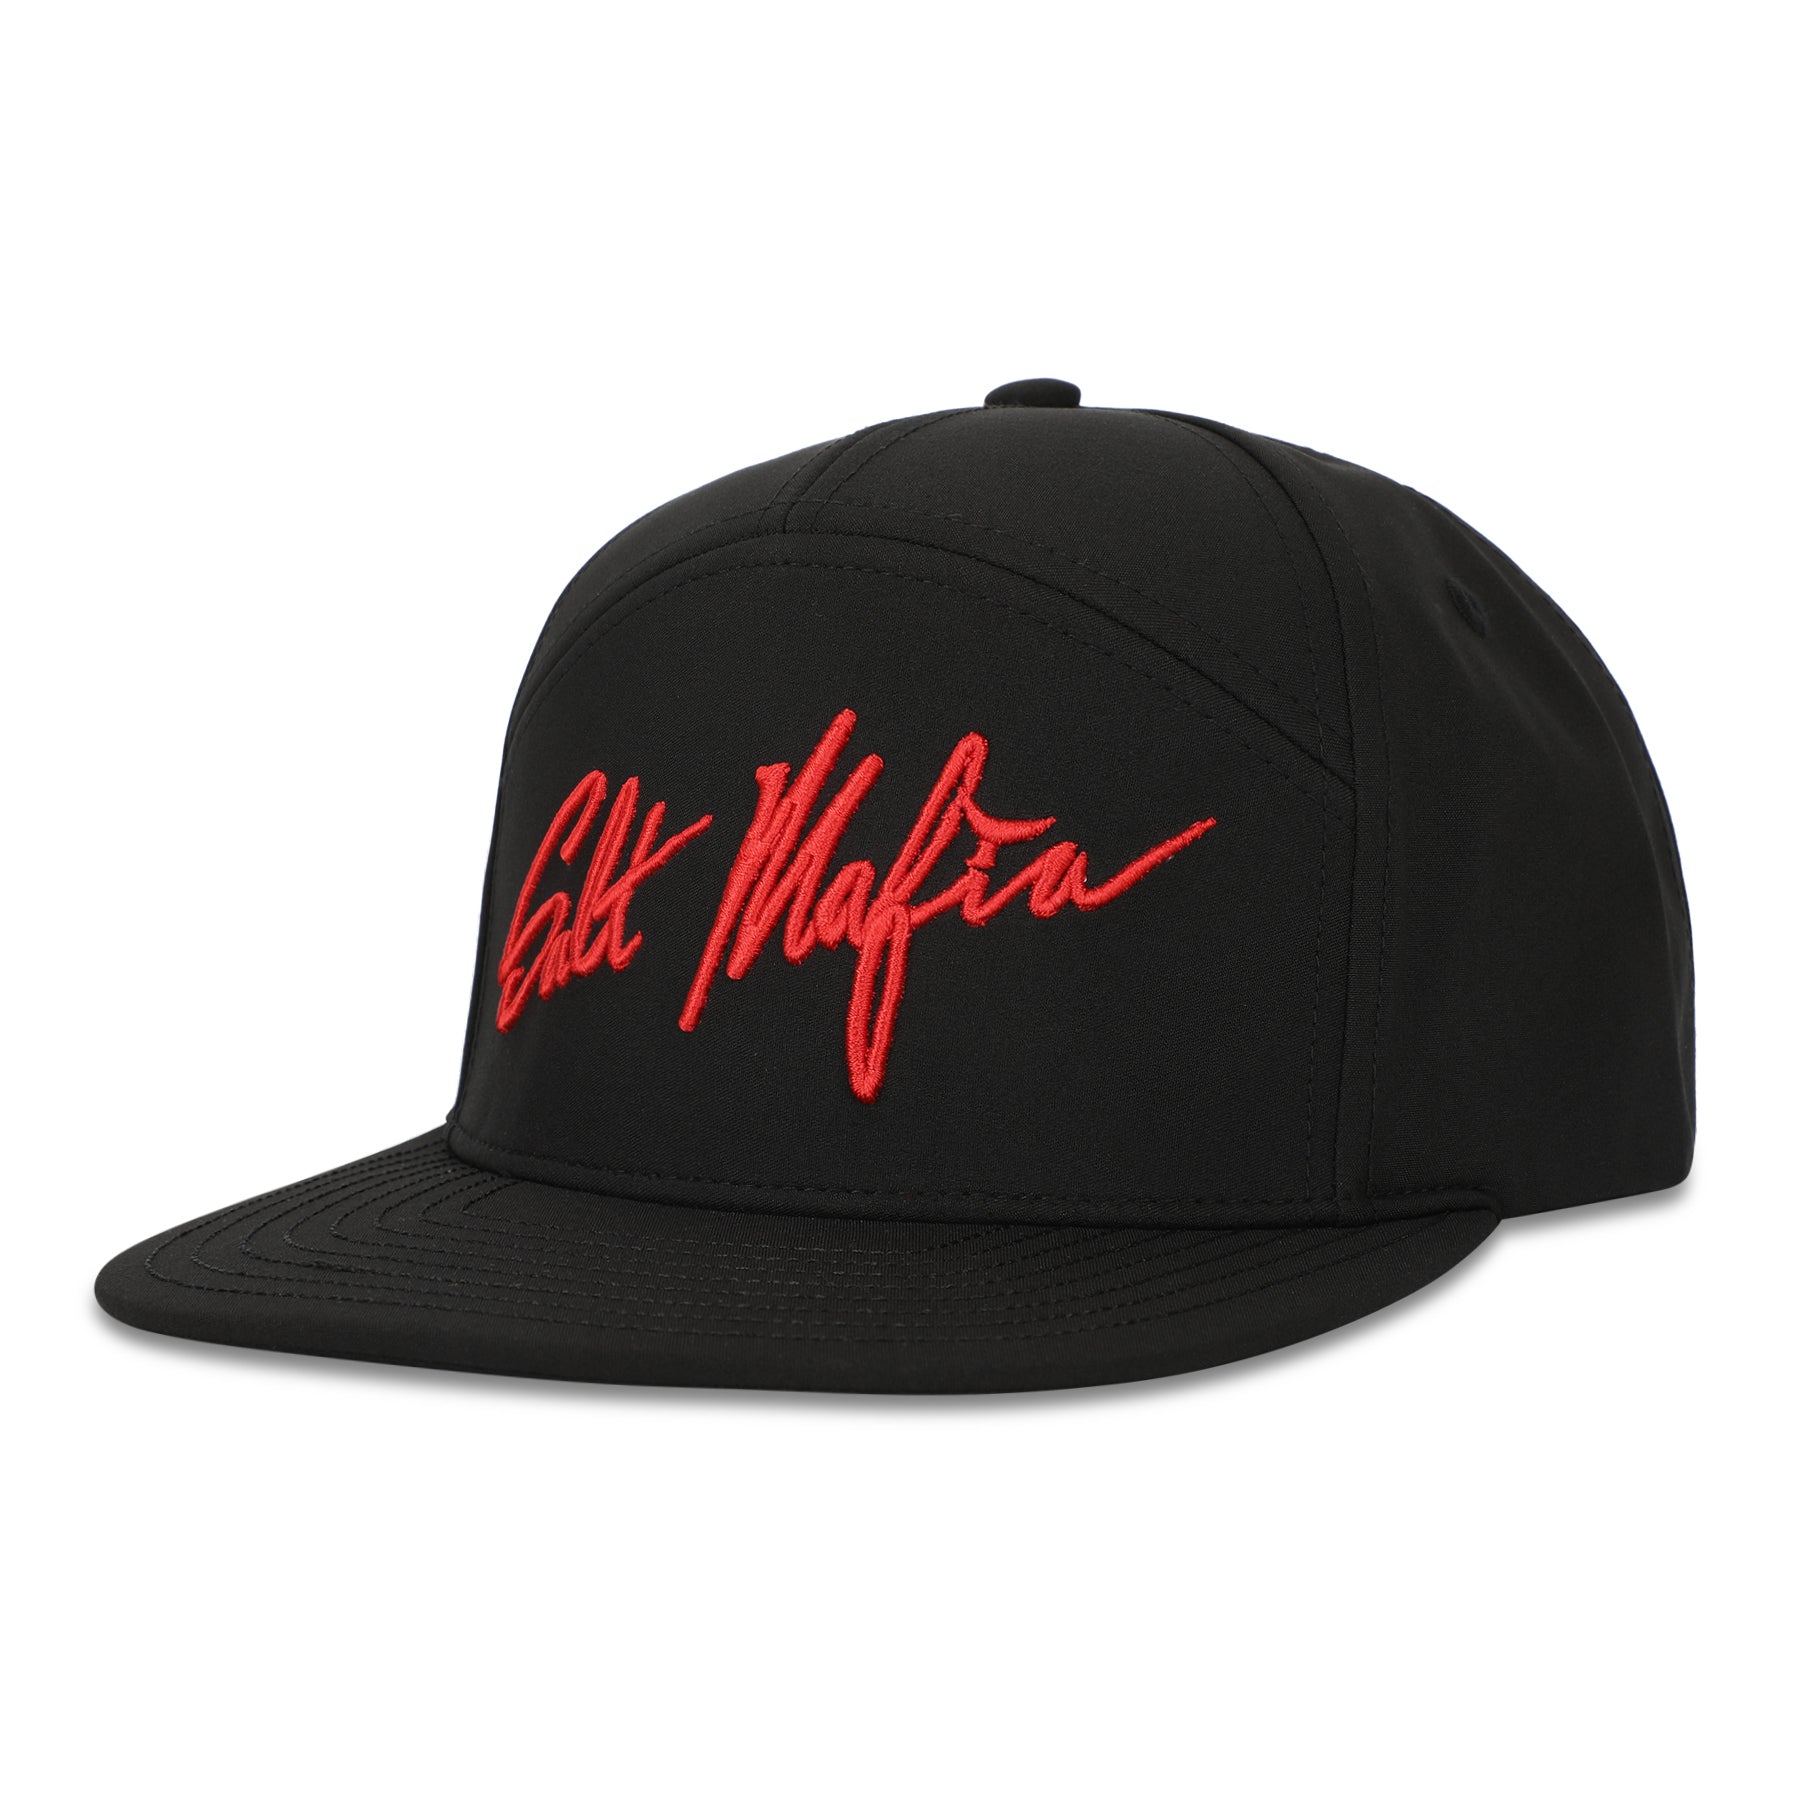 Salt Mafia Performance Hats are now available. Use code “OpeningDay” for  30% off your order!